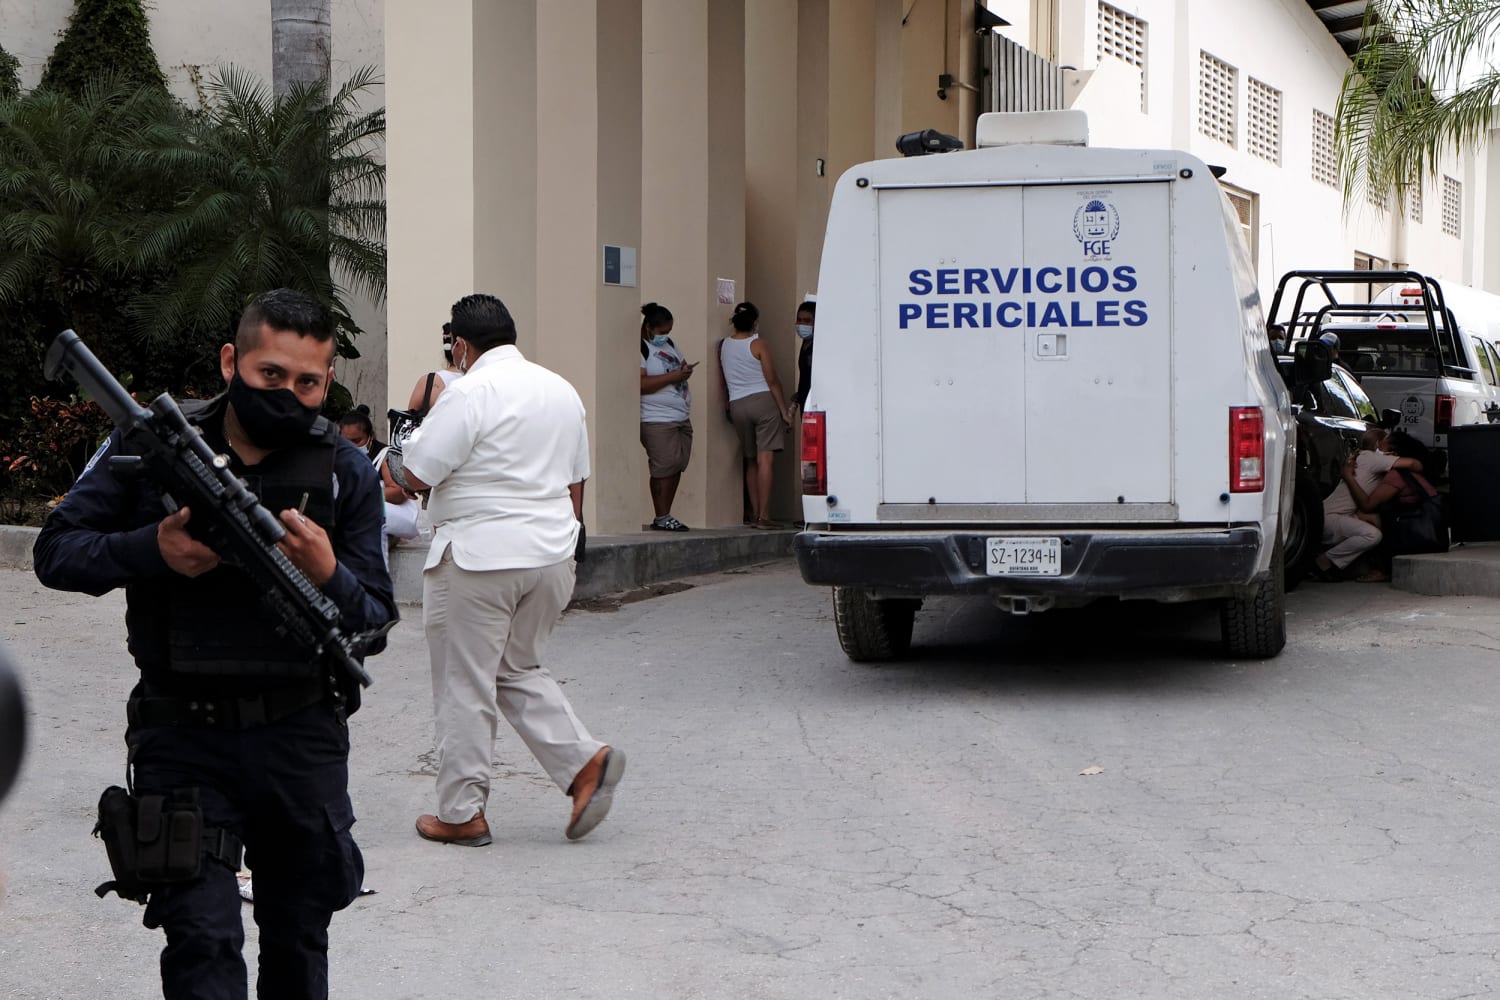 2 dead after reported shooting near Cancun resorts